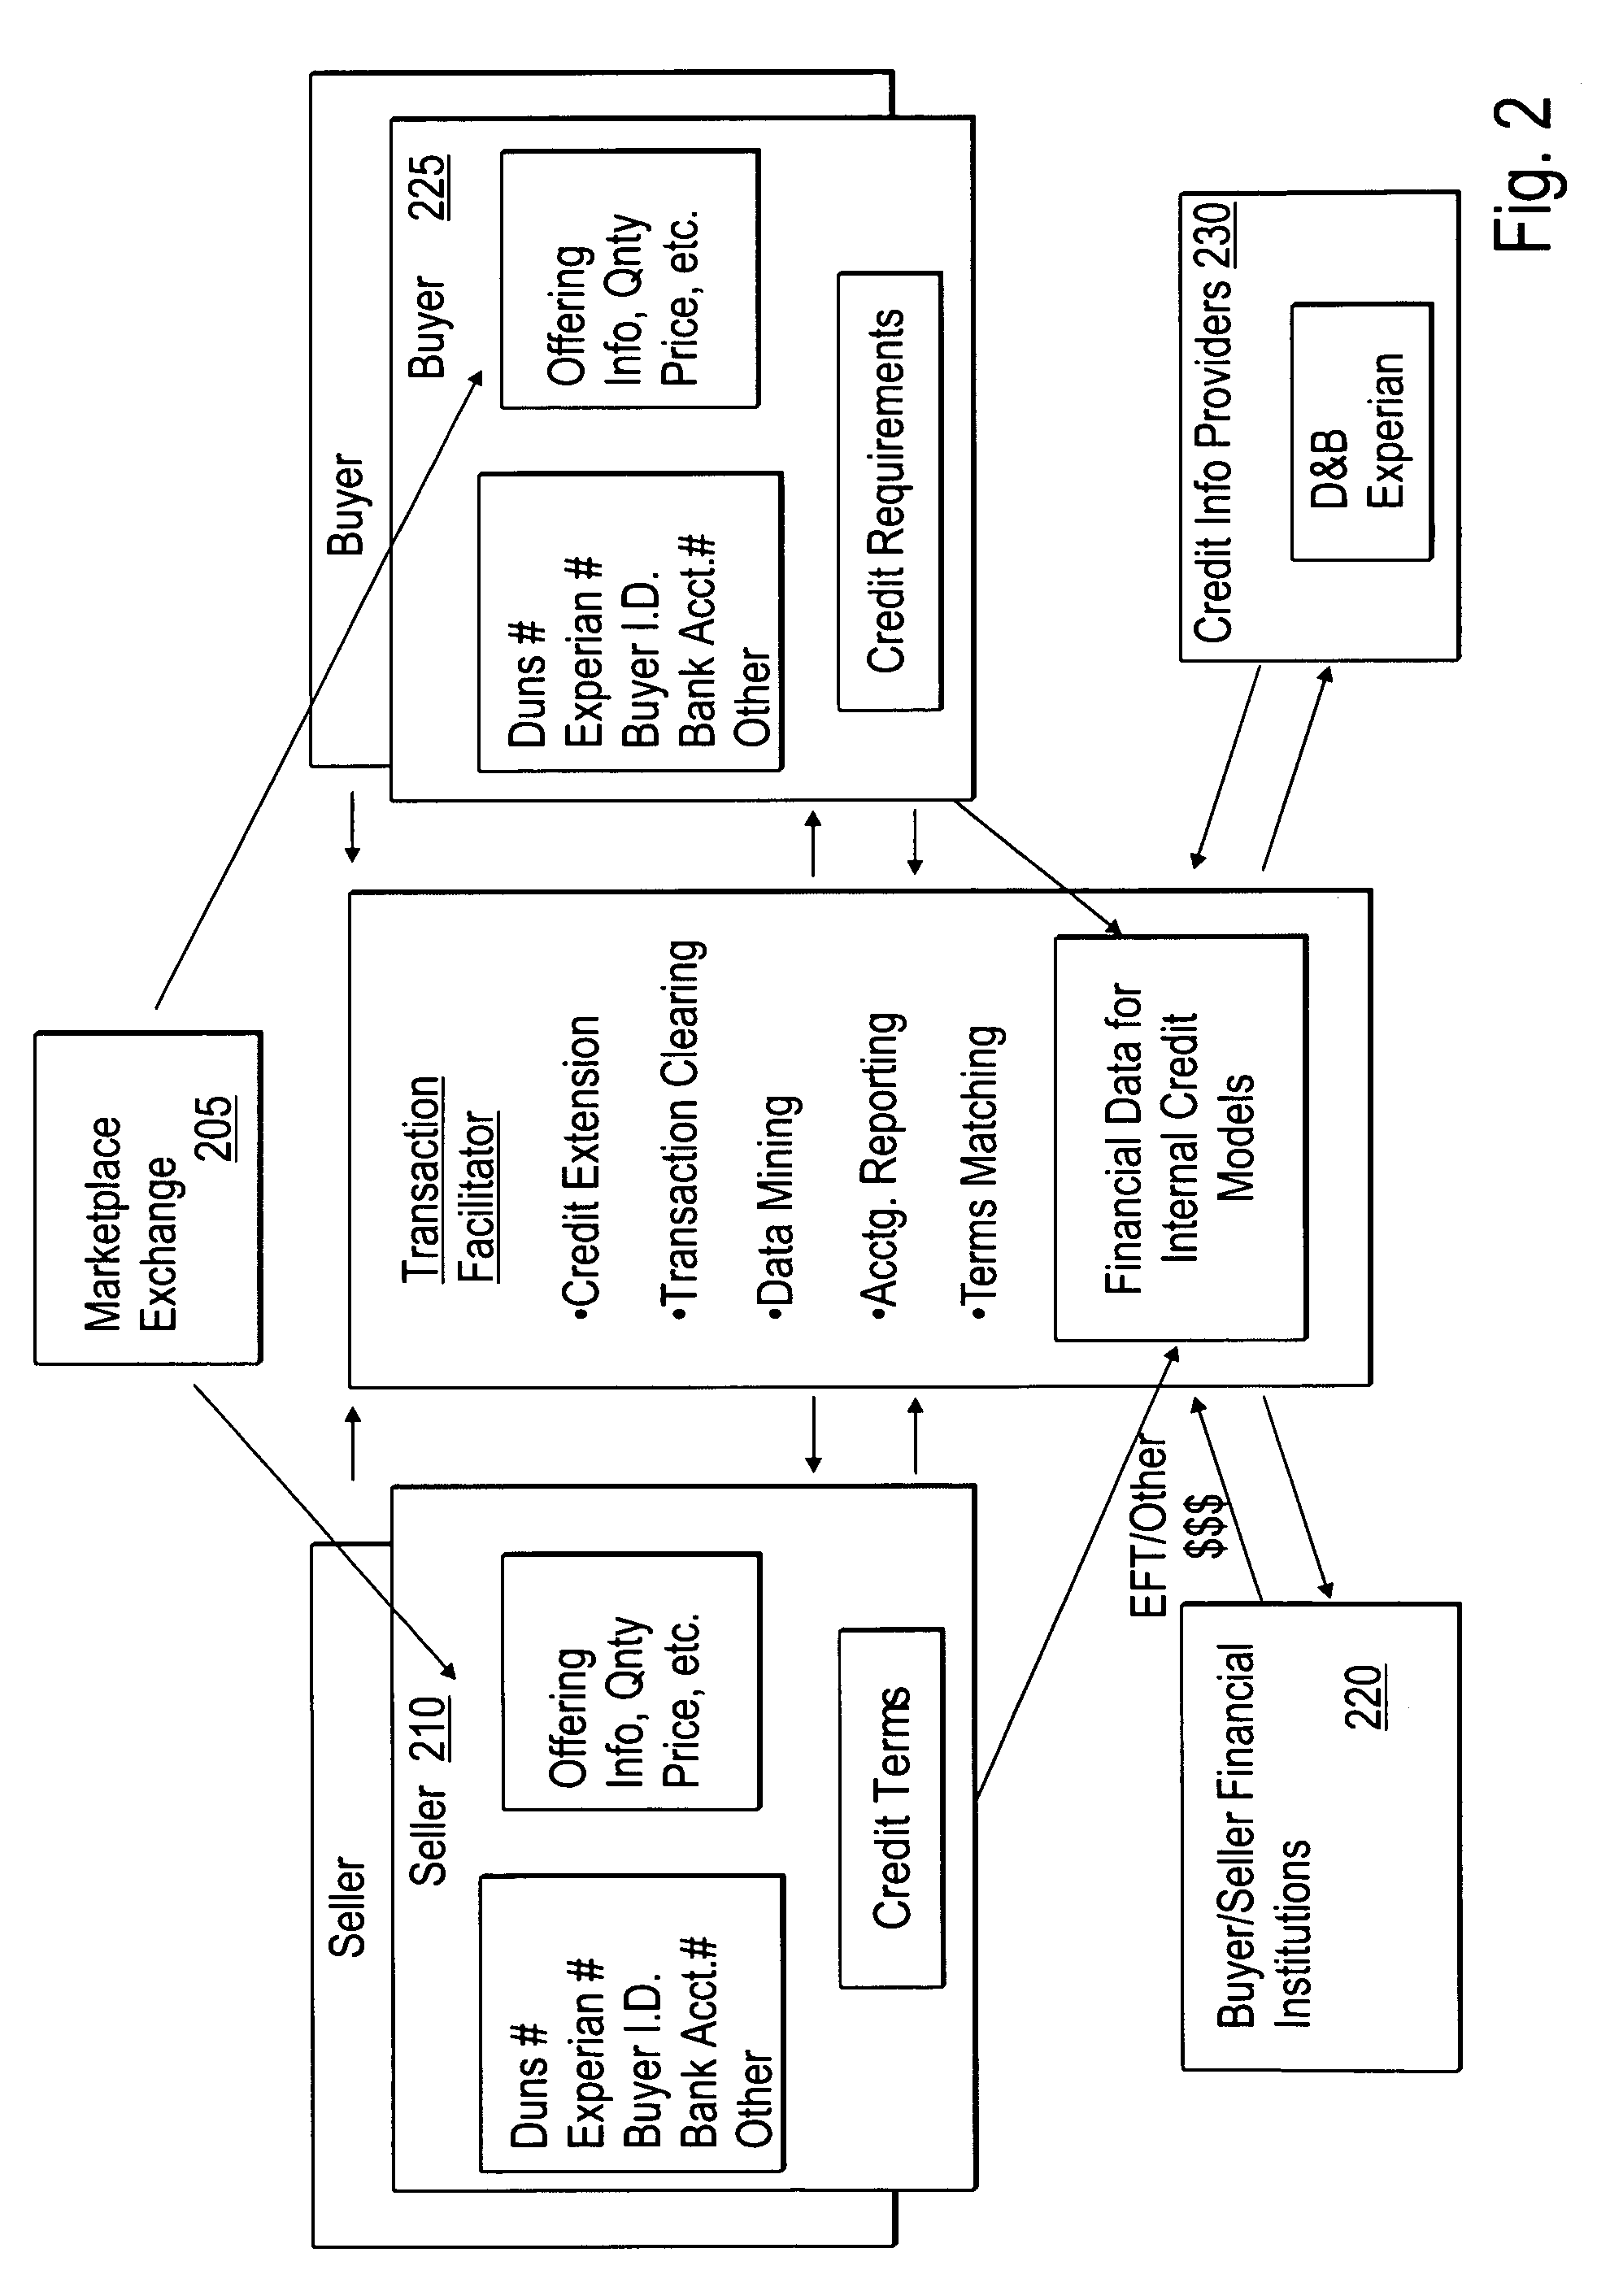 System and method for automated credit matching